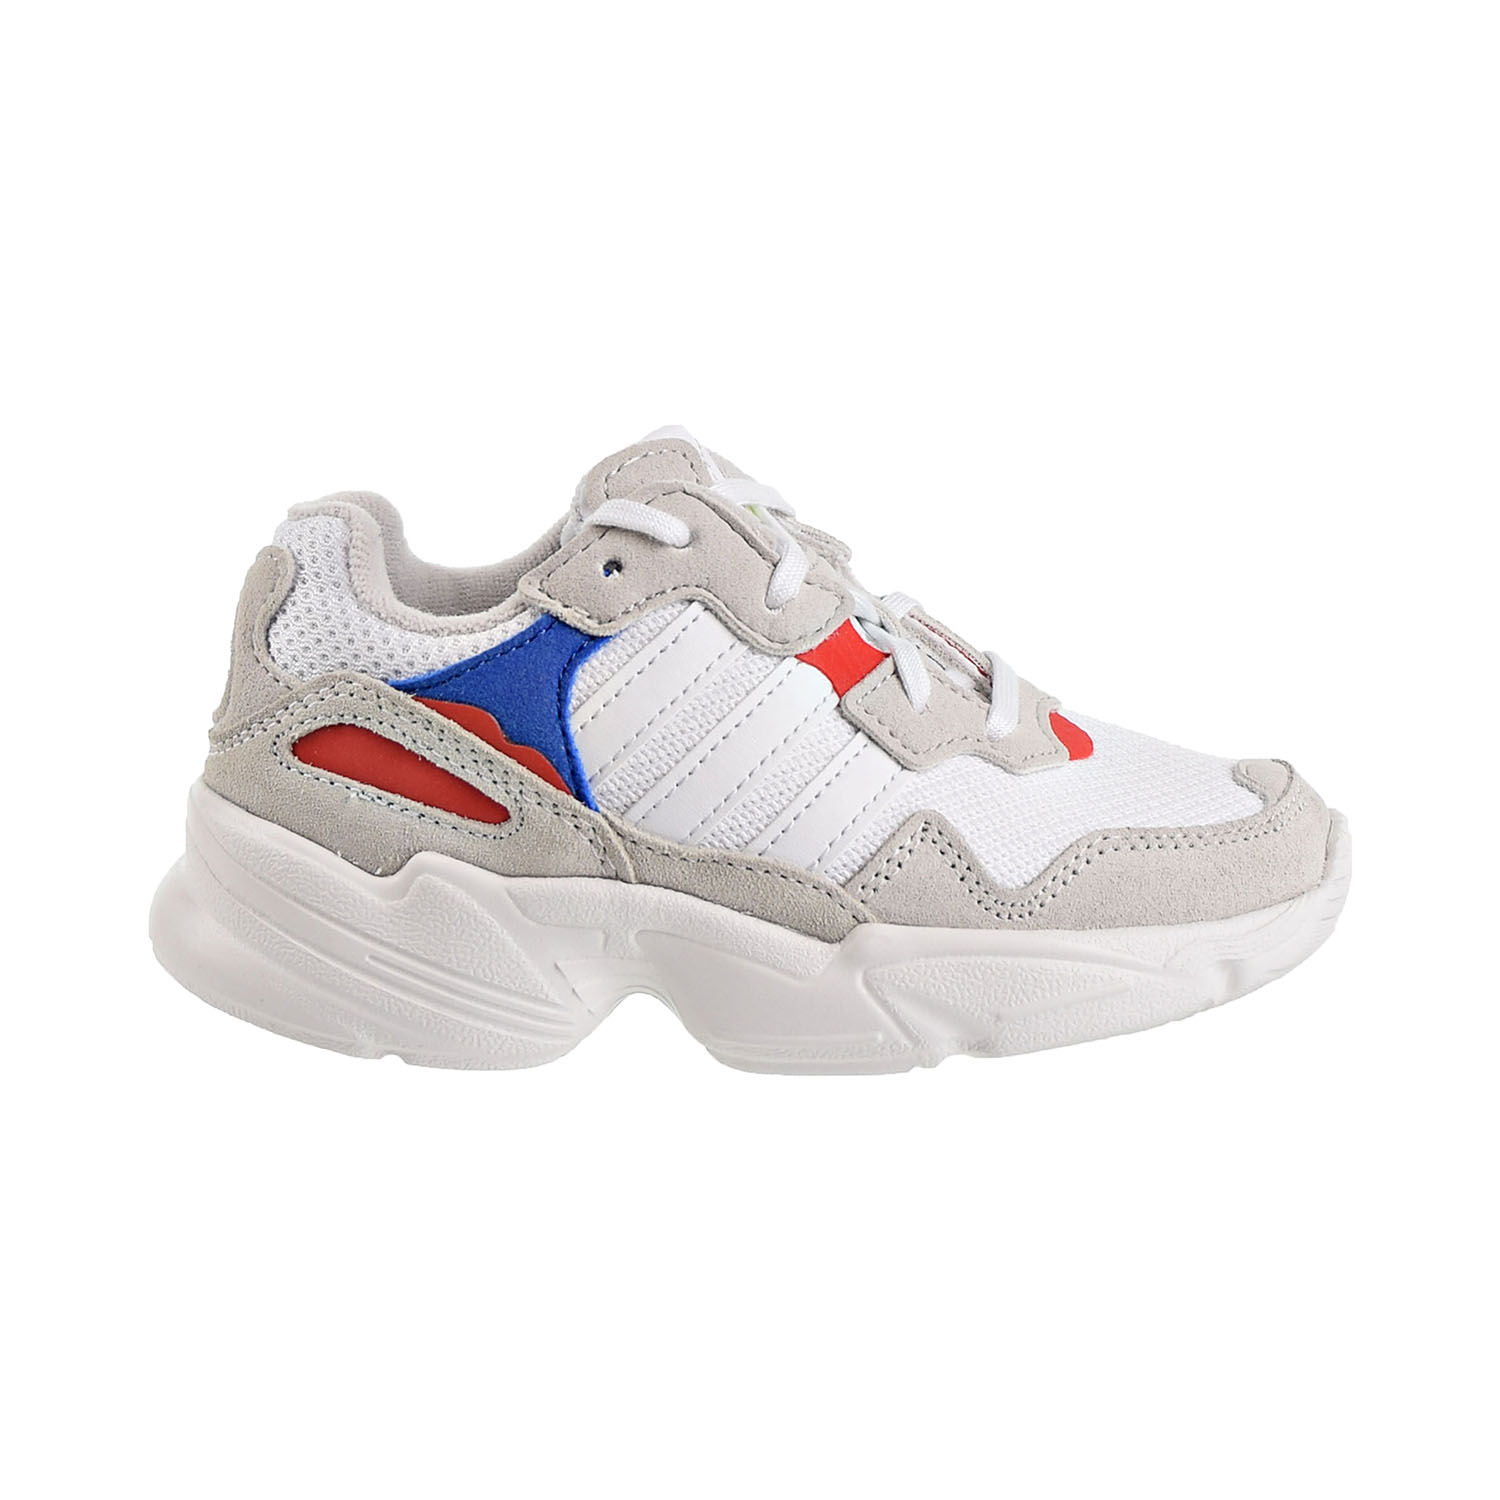 Adidas Yung-96 C Little Kids Shoes 